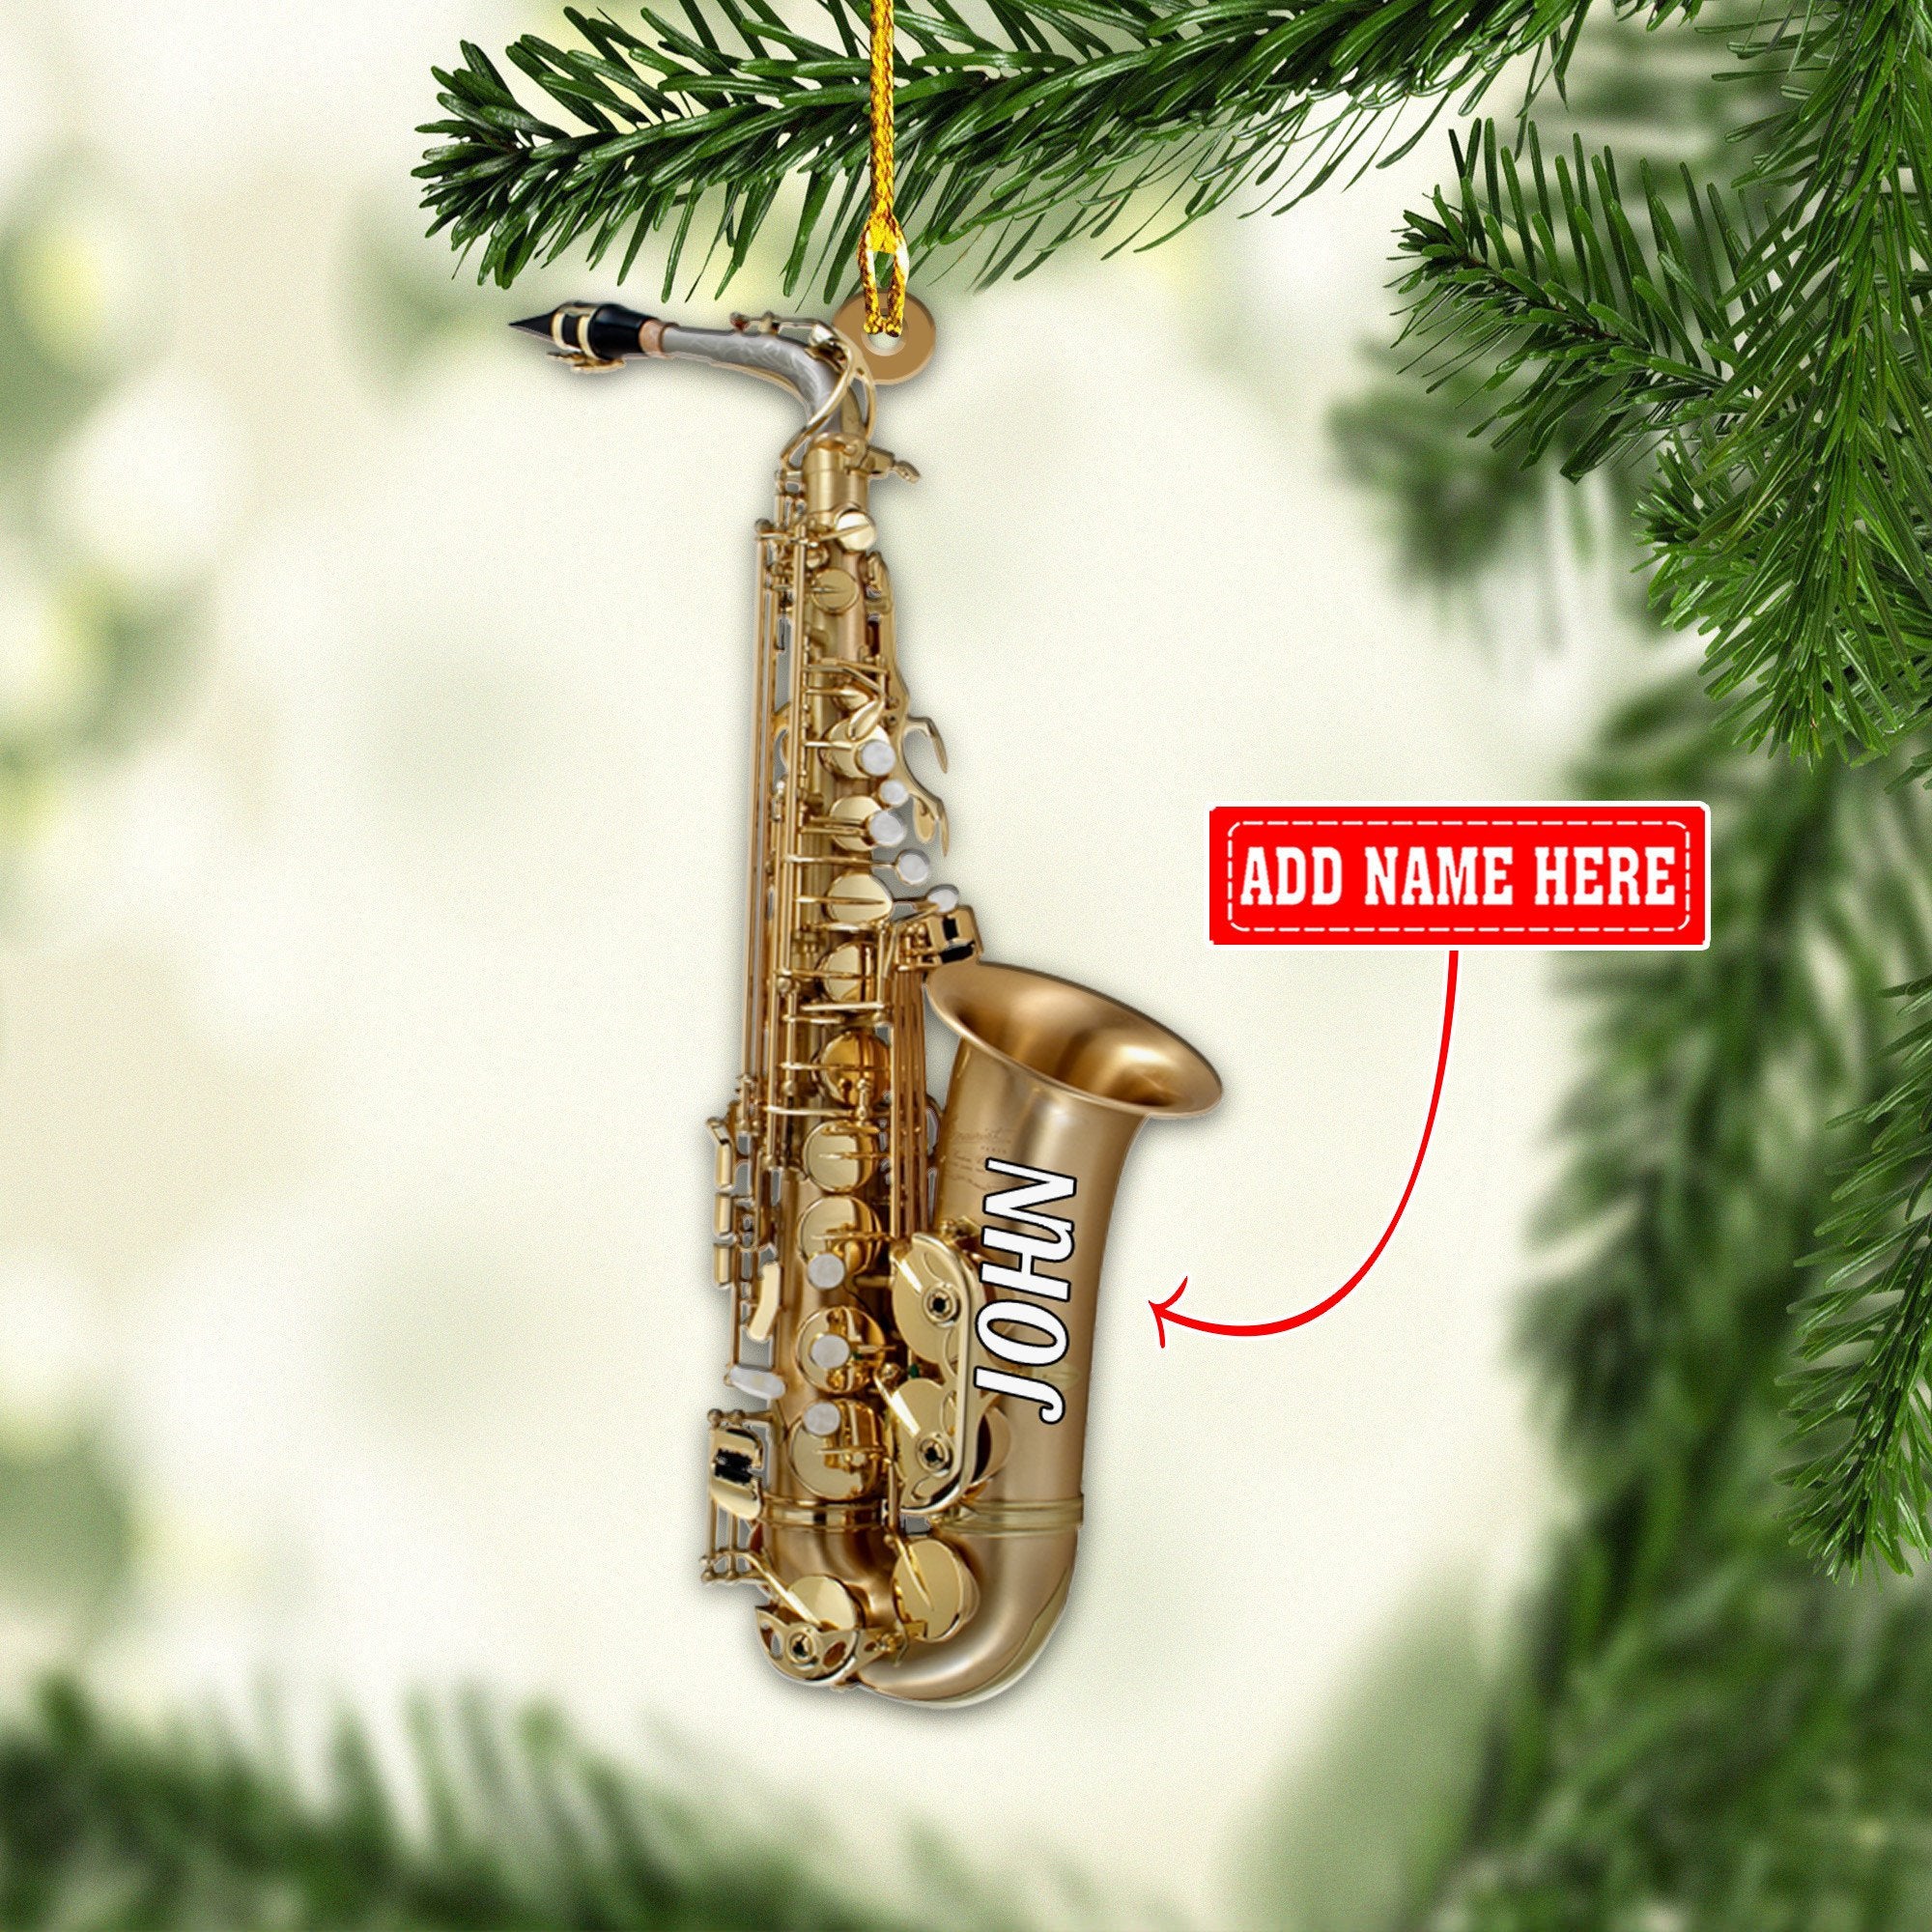 Personalized Saxophone Multi Color Shaped Acrylic Ornaments/ Christmas Gift for Saxophone Lovers